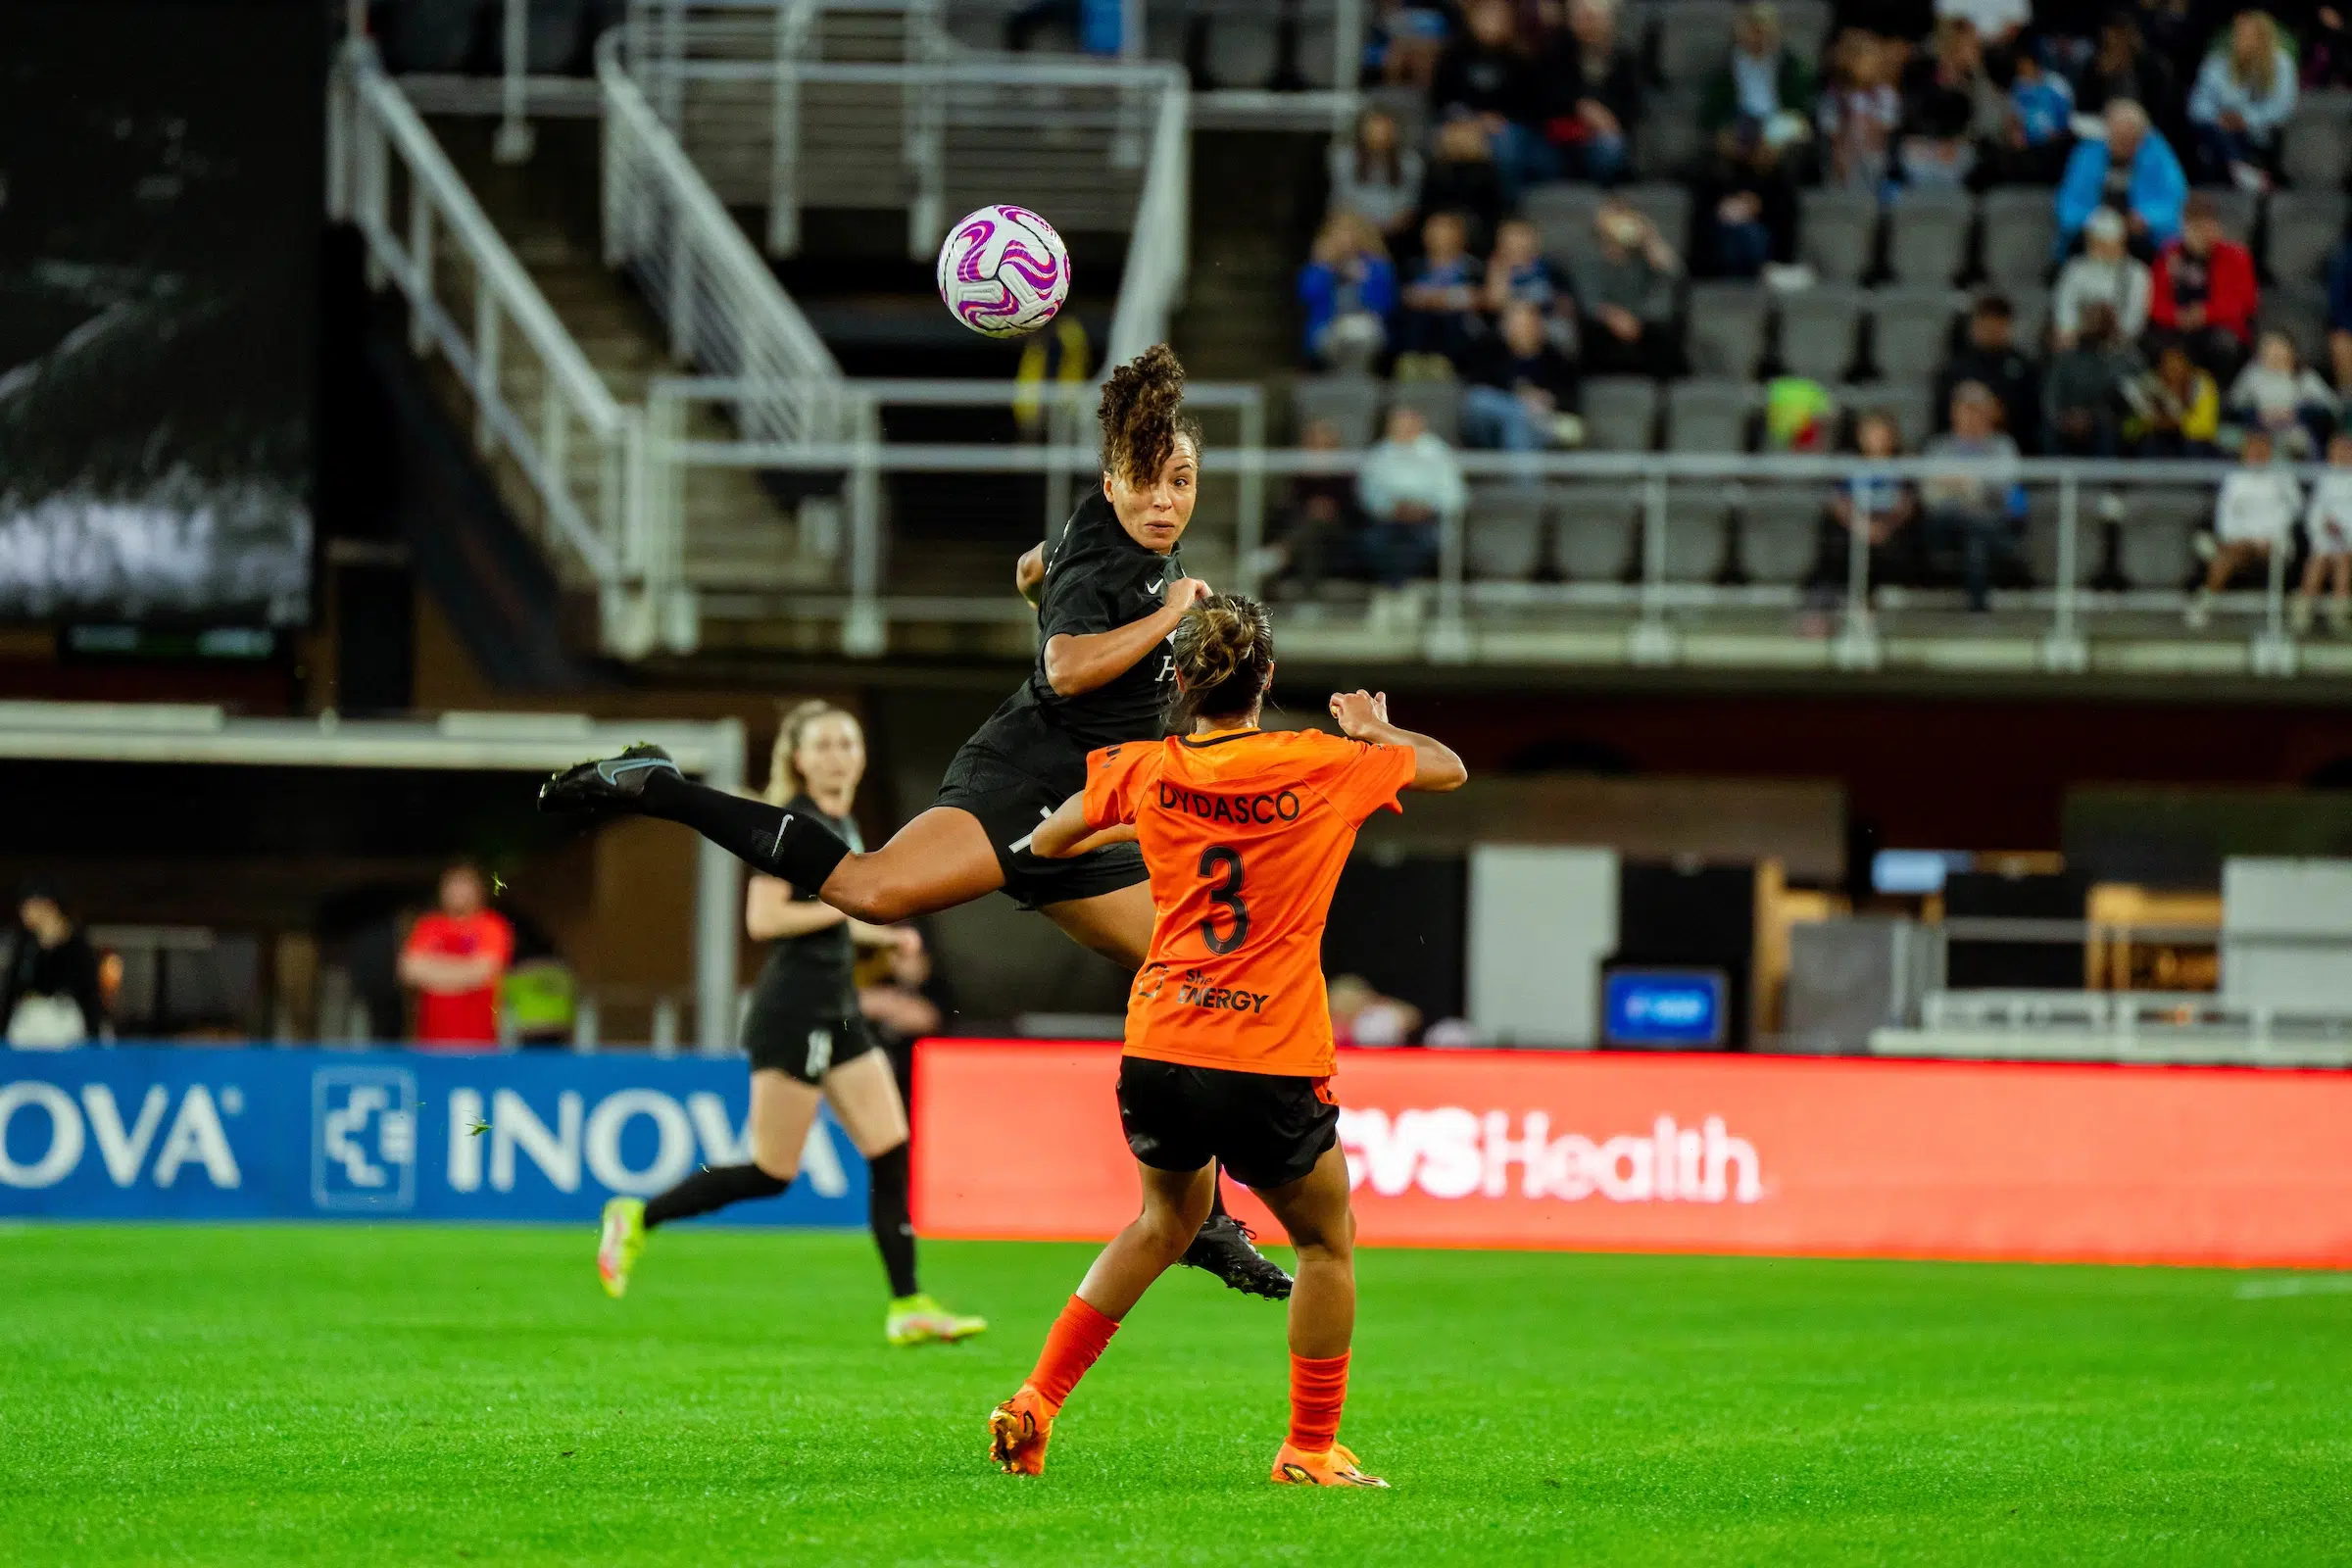 Ines Jaurena leaps in the air to head a soccer ball. A defender in an orange uniform remains on the ground.